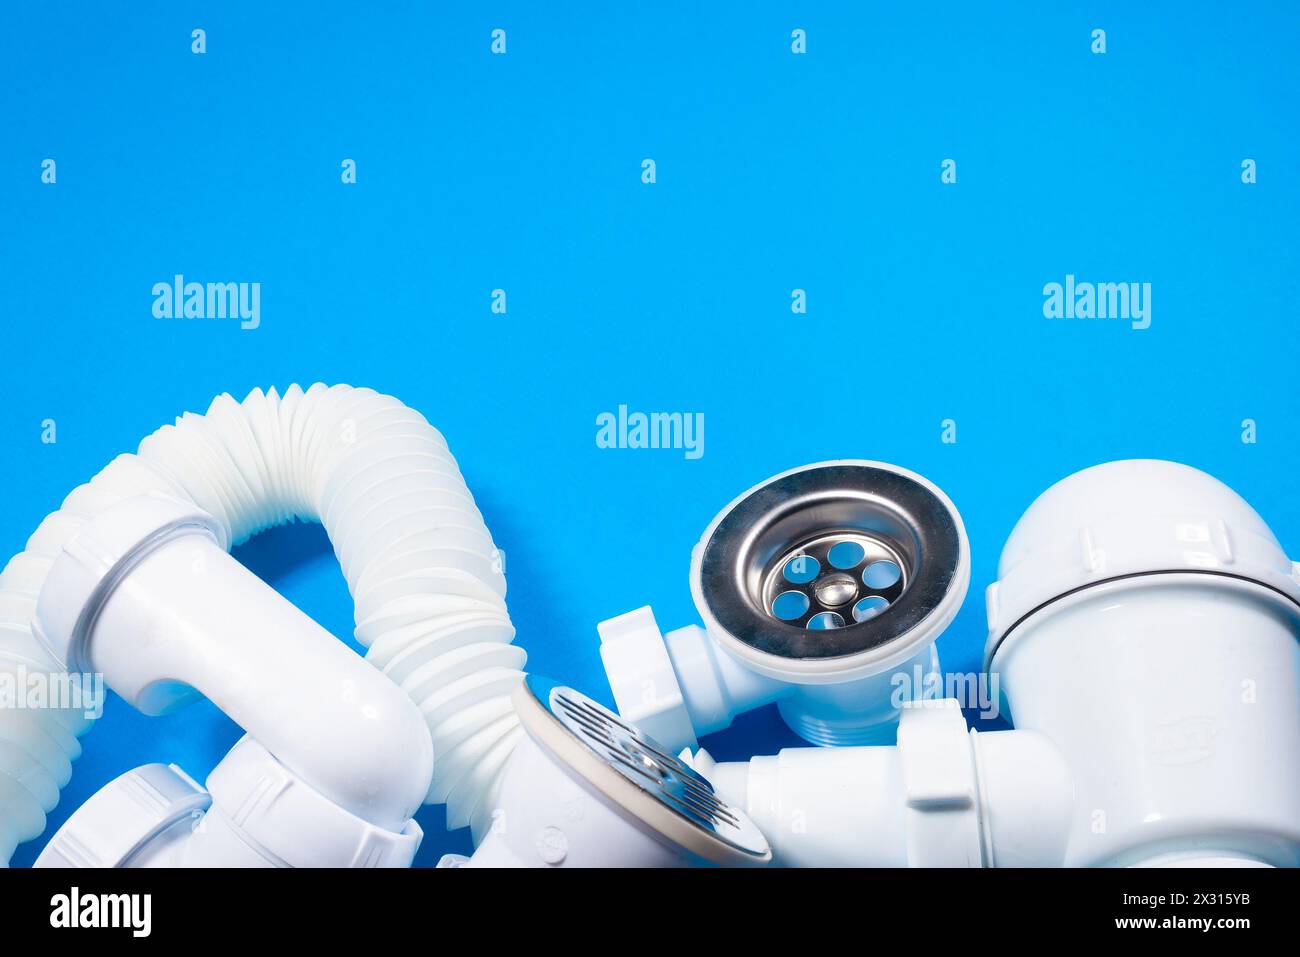 Bathtub drain pipeline system parts on the blue top view background copy space. Siphon flat lay. Stock Photo